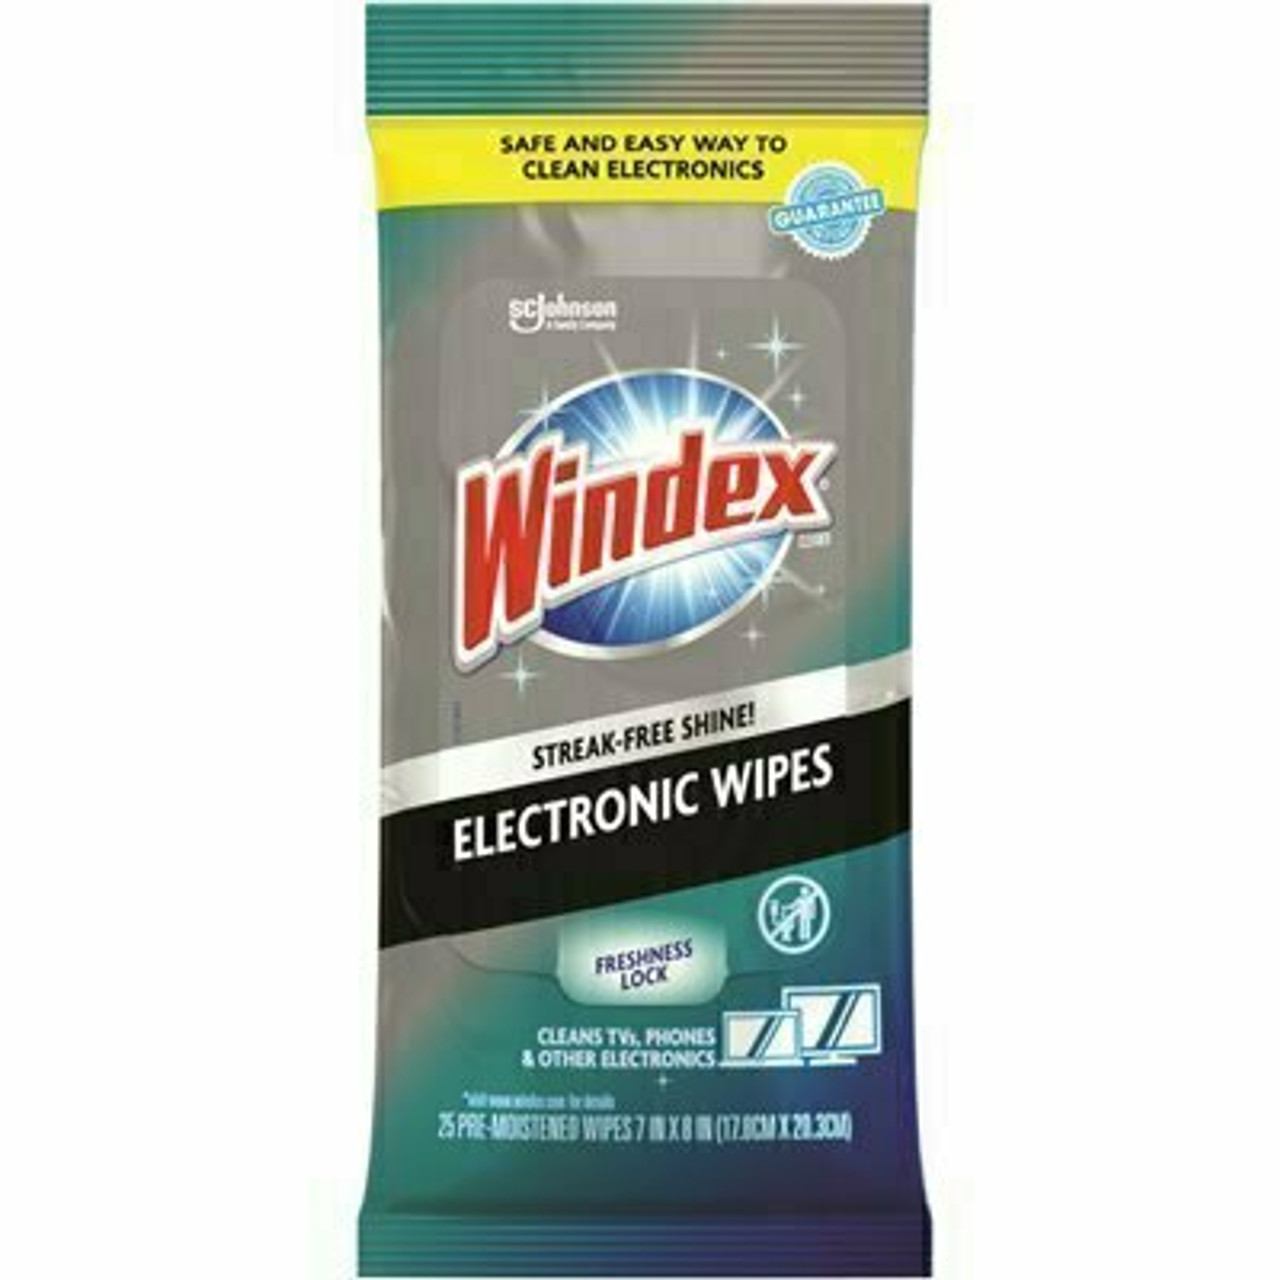 Windex Electronics Pre-Moistened Wipes (25-Count)